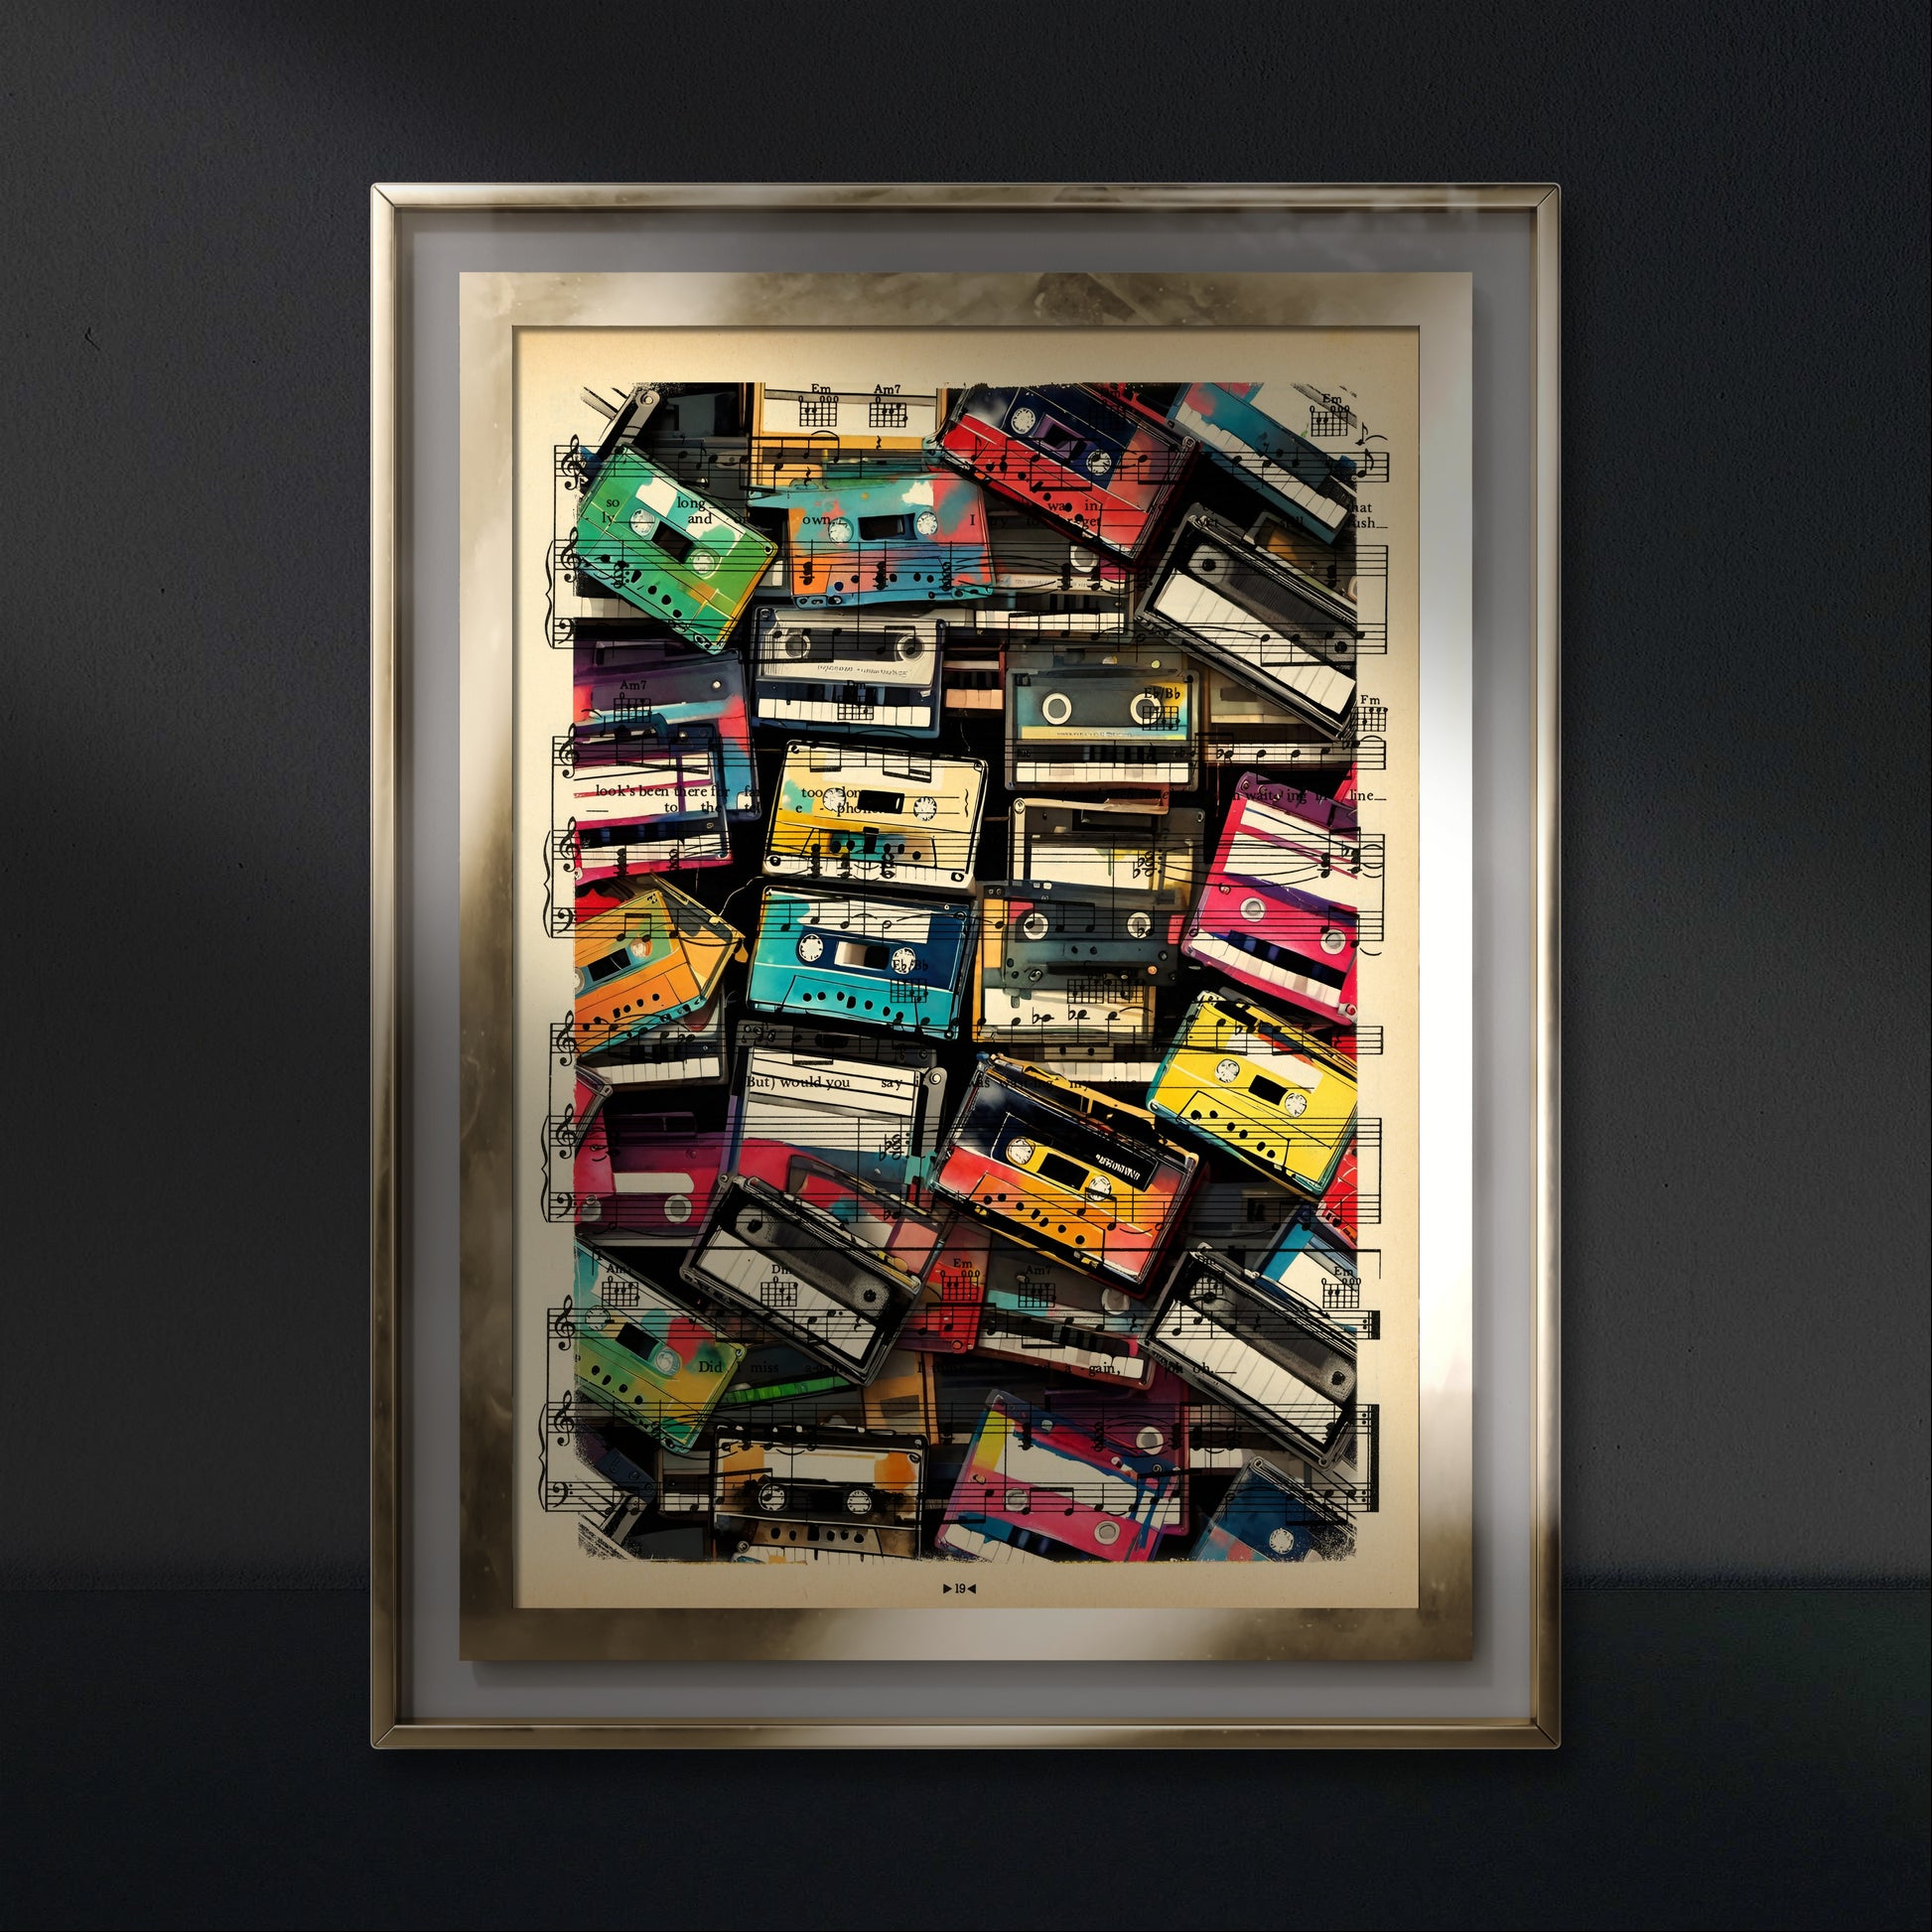 Cassette tapes and synthesizers in artwork